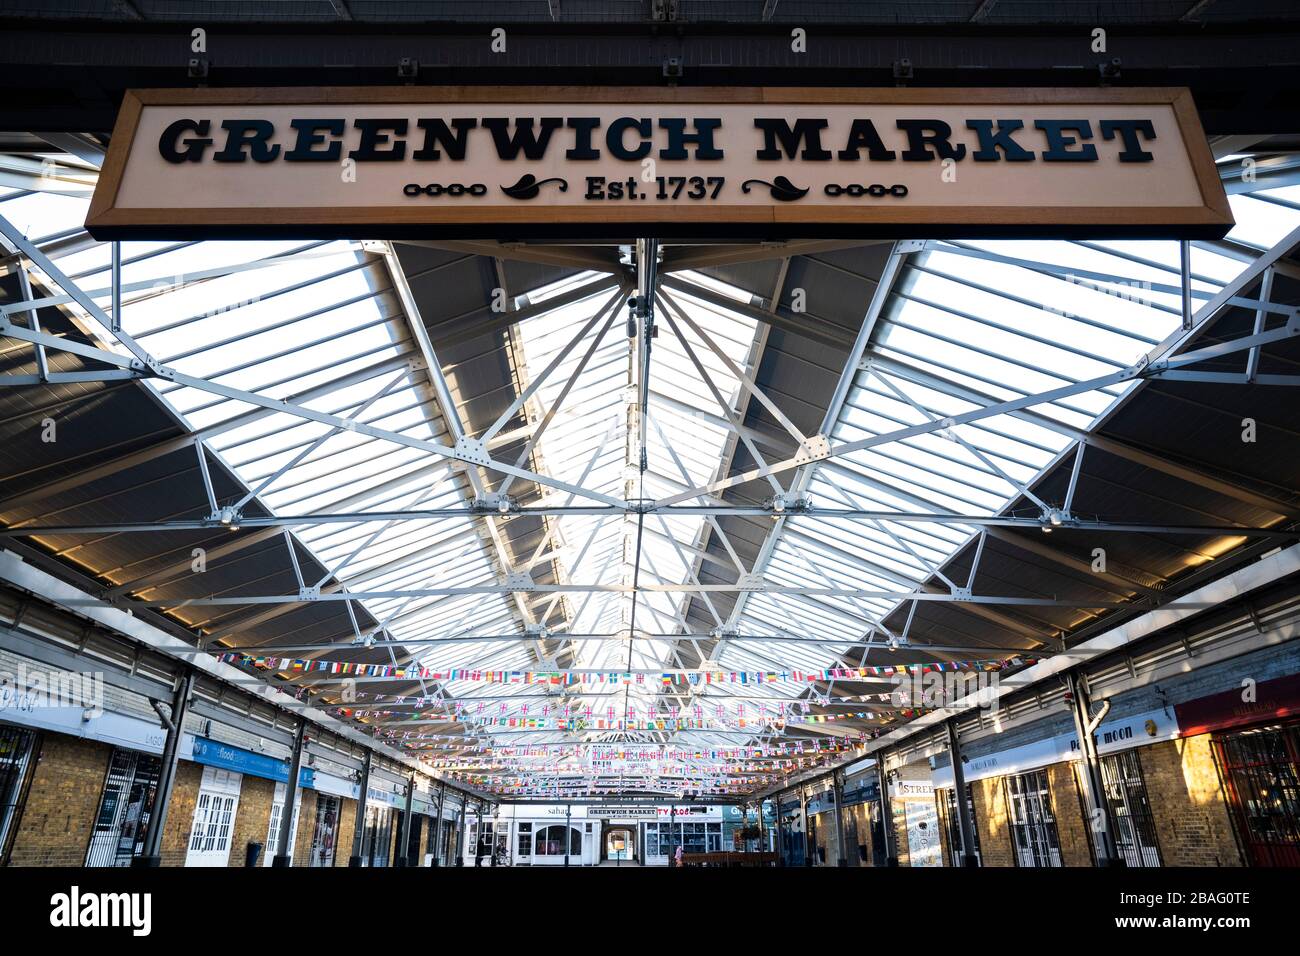 Coronavirus causes closures of parks, tourist spots, markets and transport in Greenwich, London, UK.  Greenwich Market pictured. Stock Photo